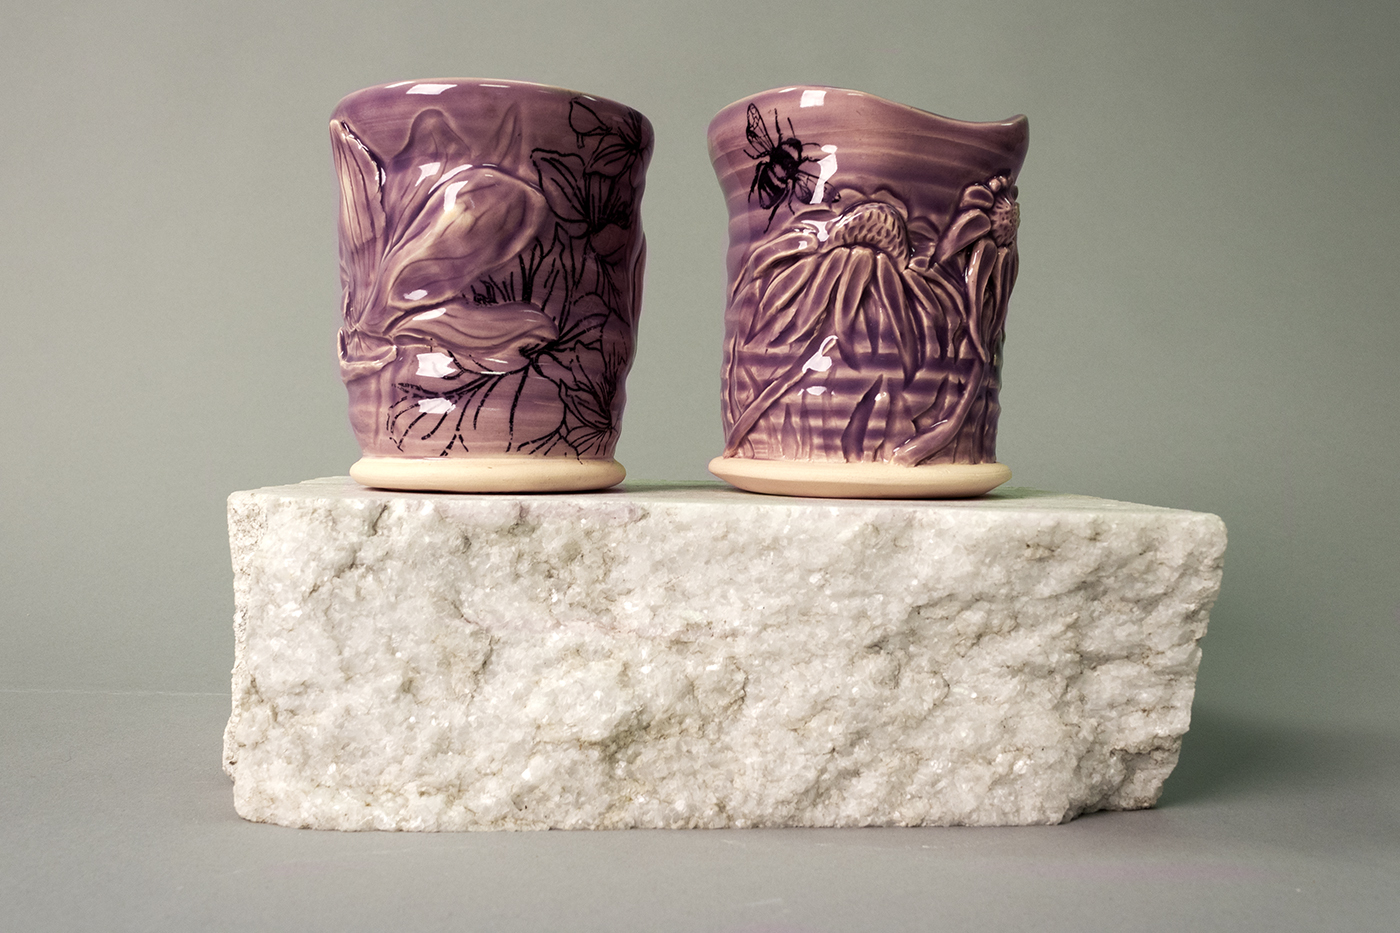 Purple cups carved with carved flowers sitting on a white stone.